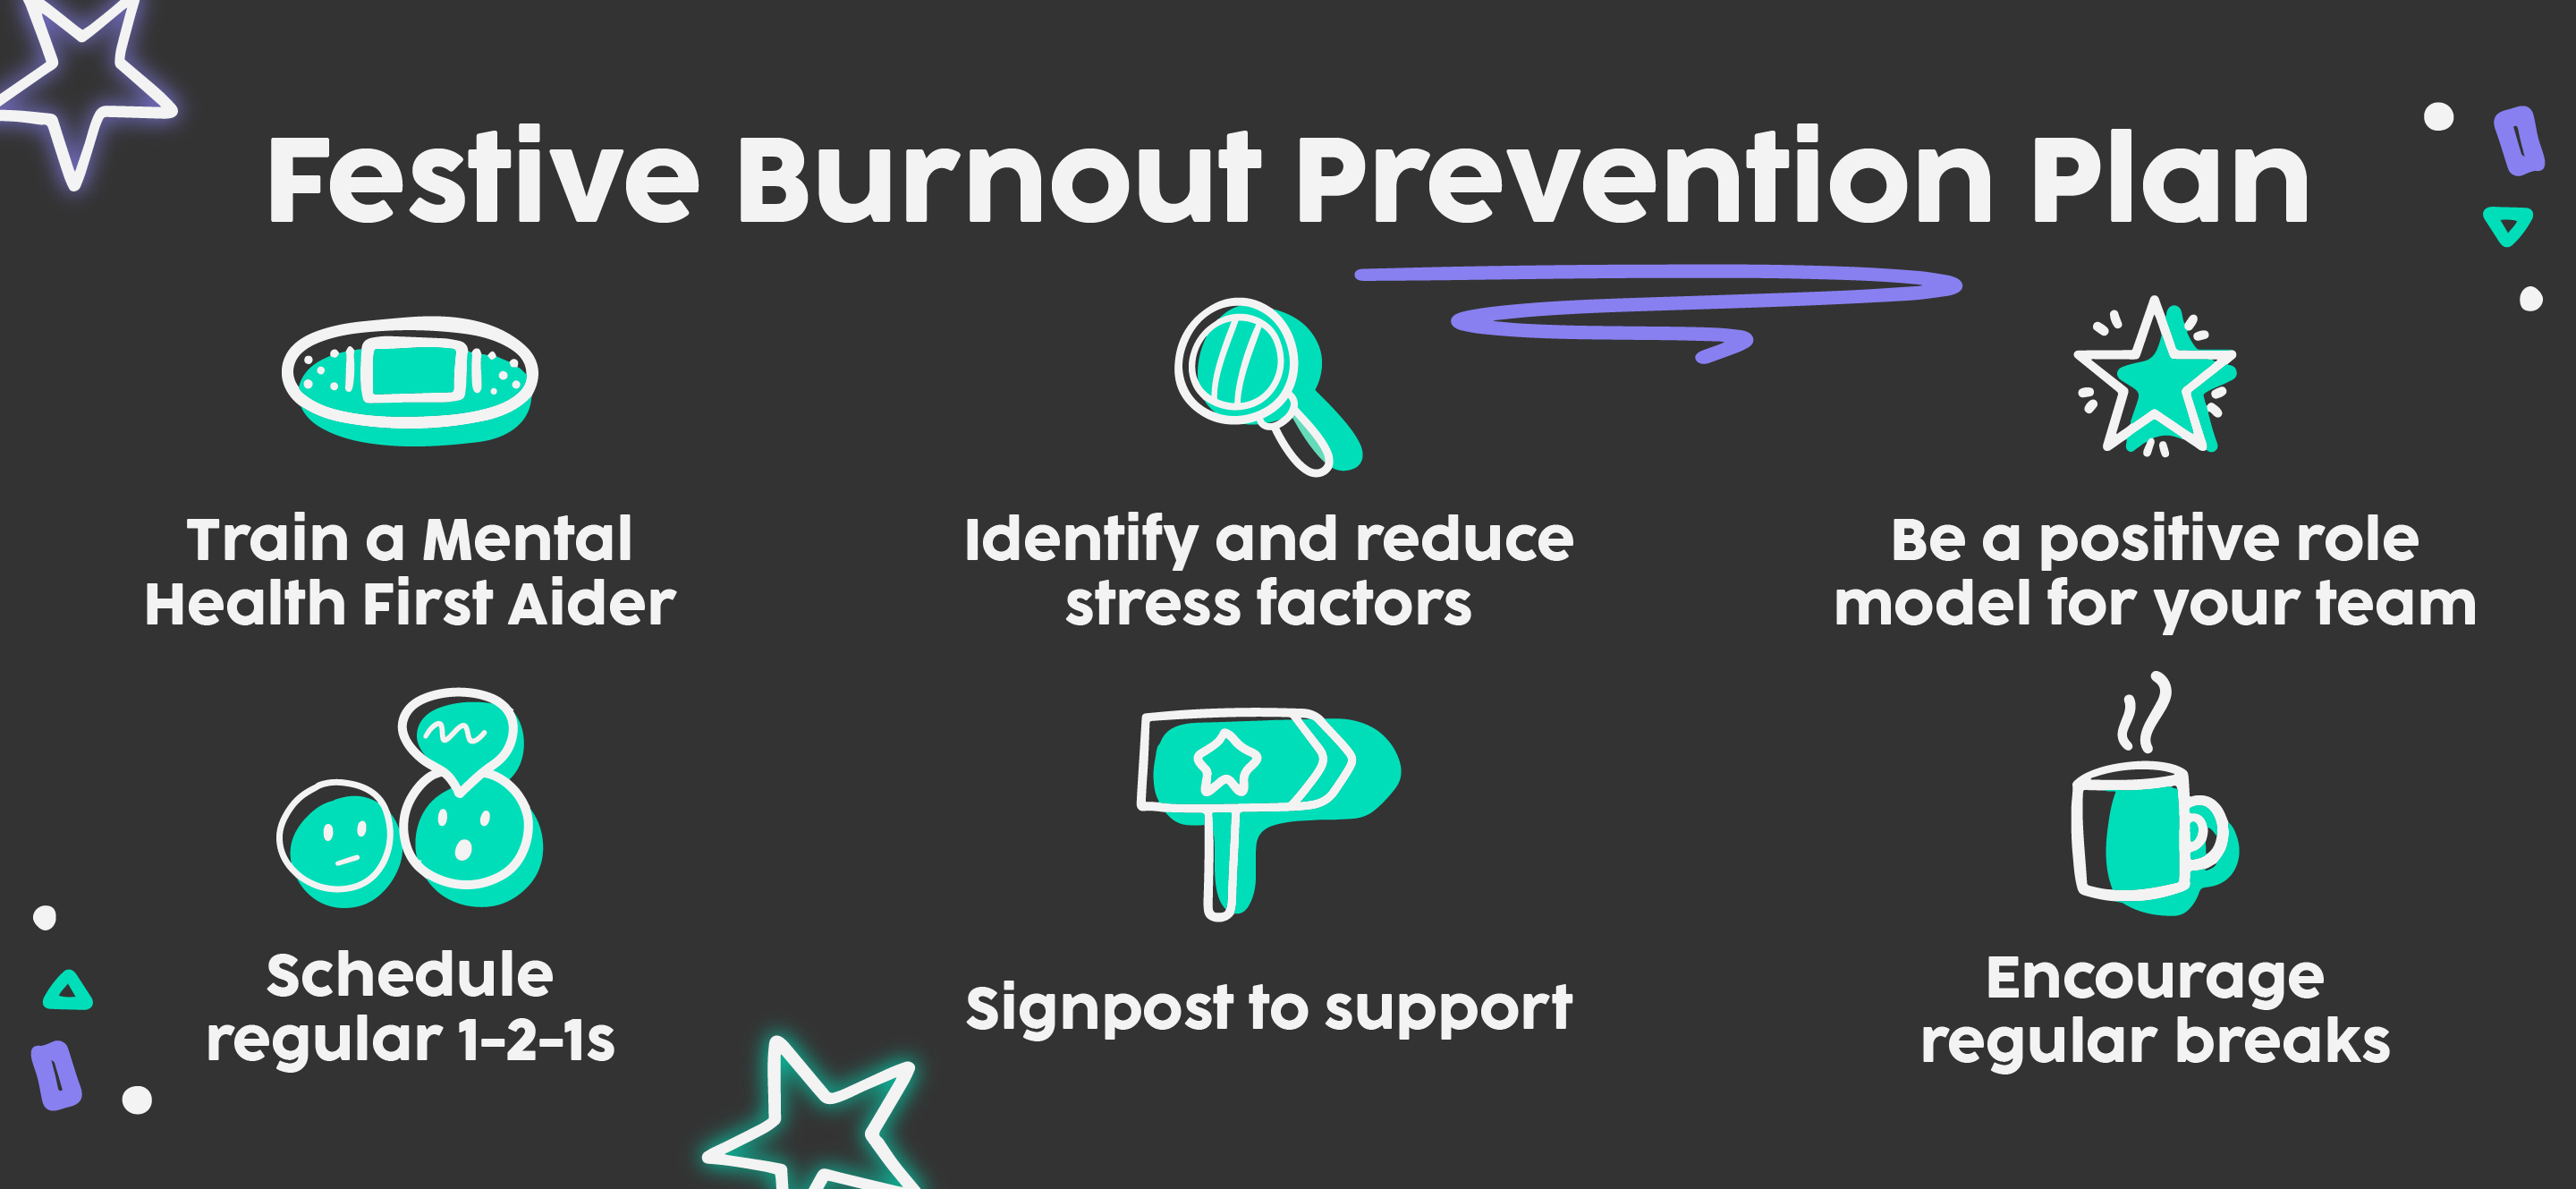 festive burnout prevention plan for managers